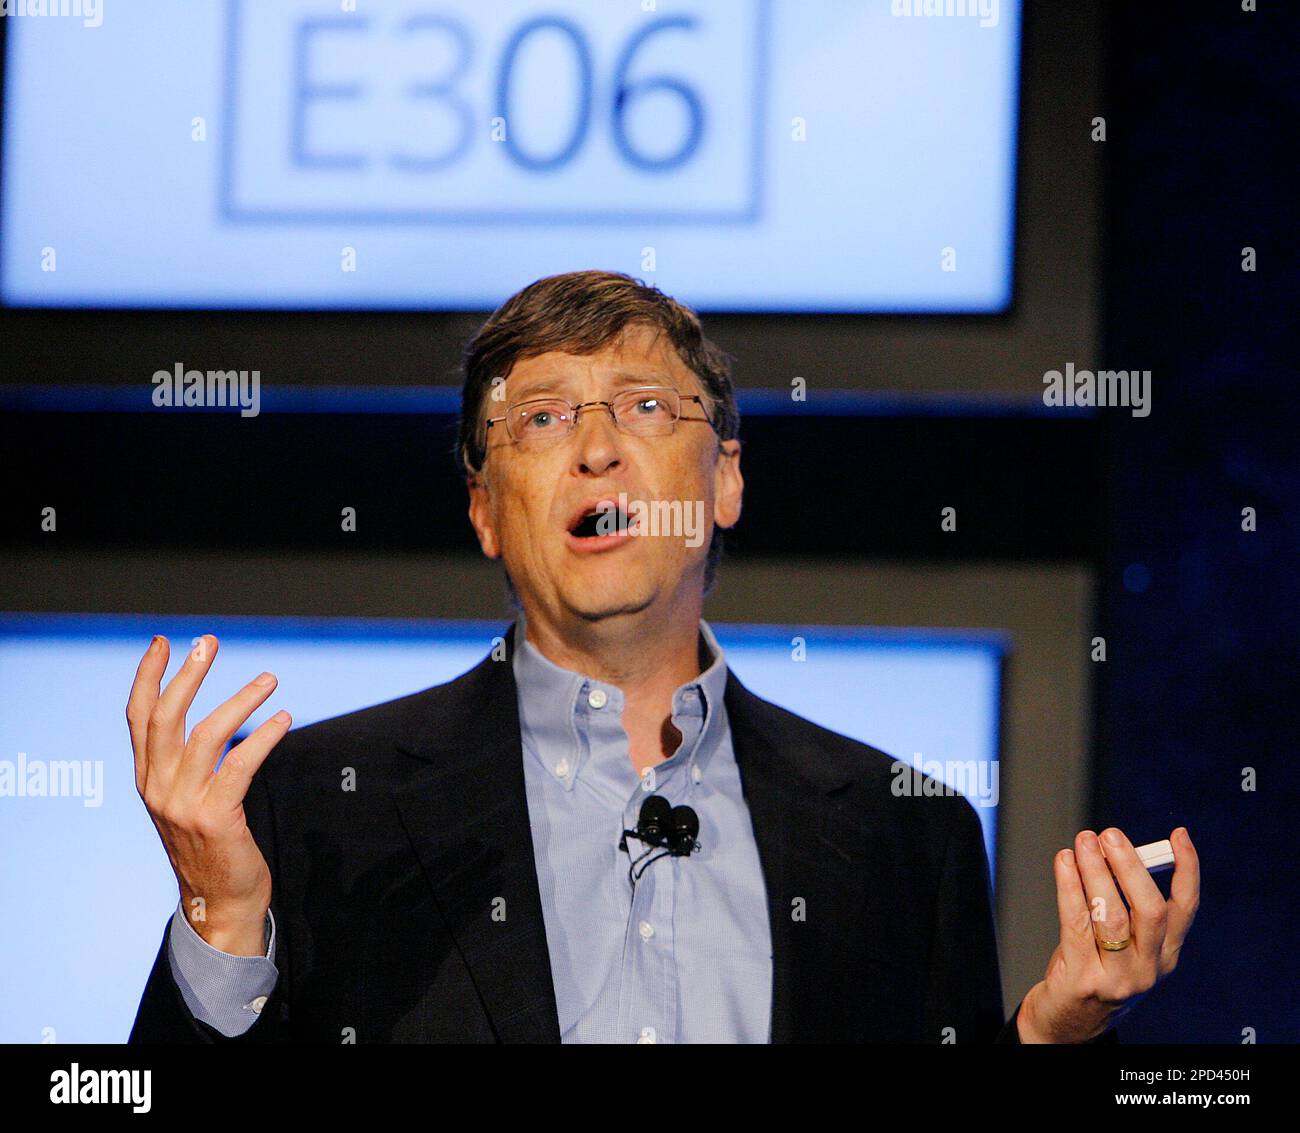 Microsoft Corp. Chairman and Chief Software Architect, Bill Gates announces  Microsoft's new "Live Anywhere" initiative, designed to link user's mobile  phones, XBox 360s, and personal computers during a presentation of new  software